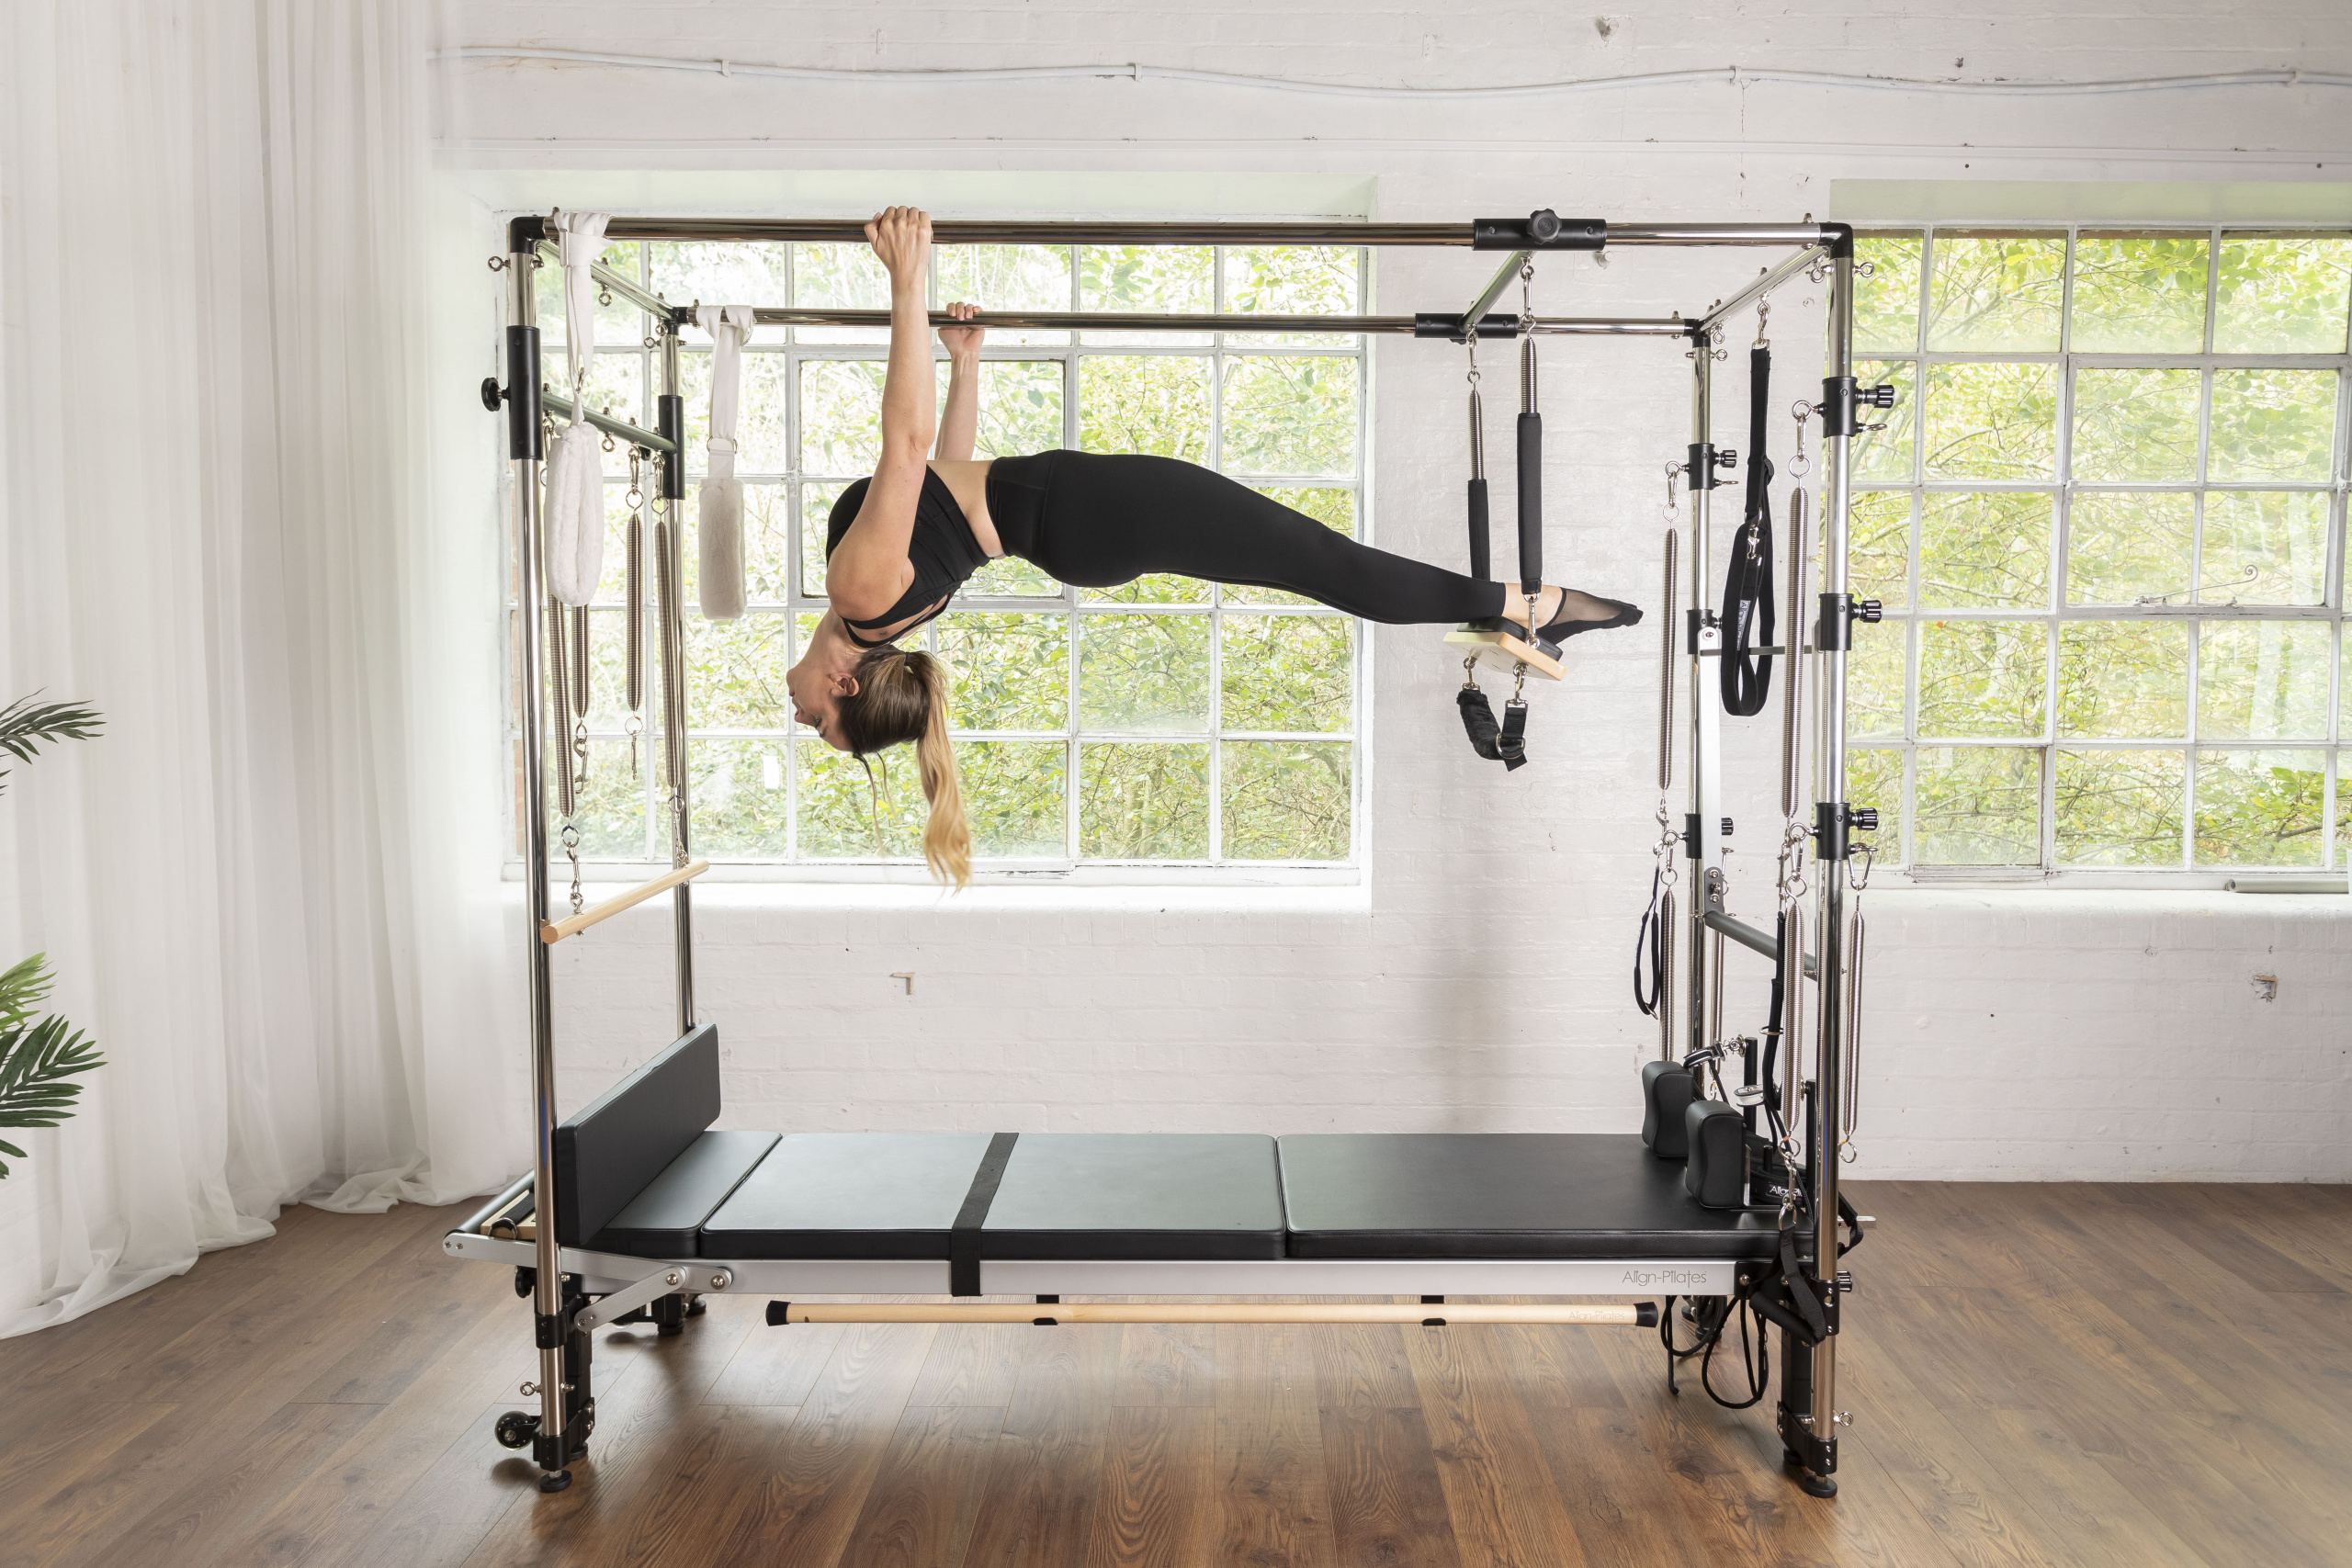 10 Facts About Equipment Pilates, Equipment Pilates Guide